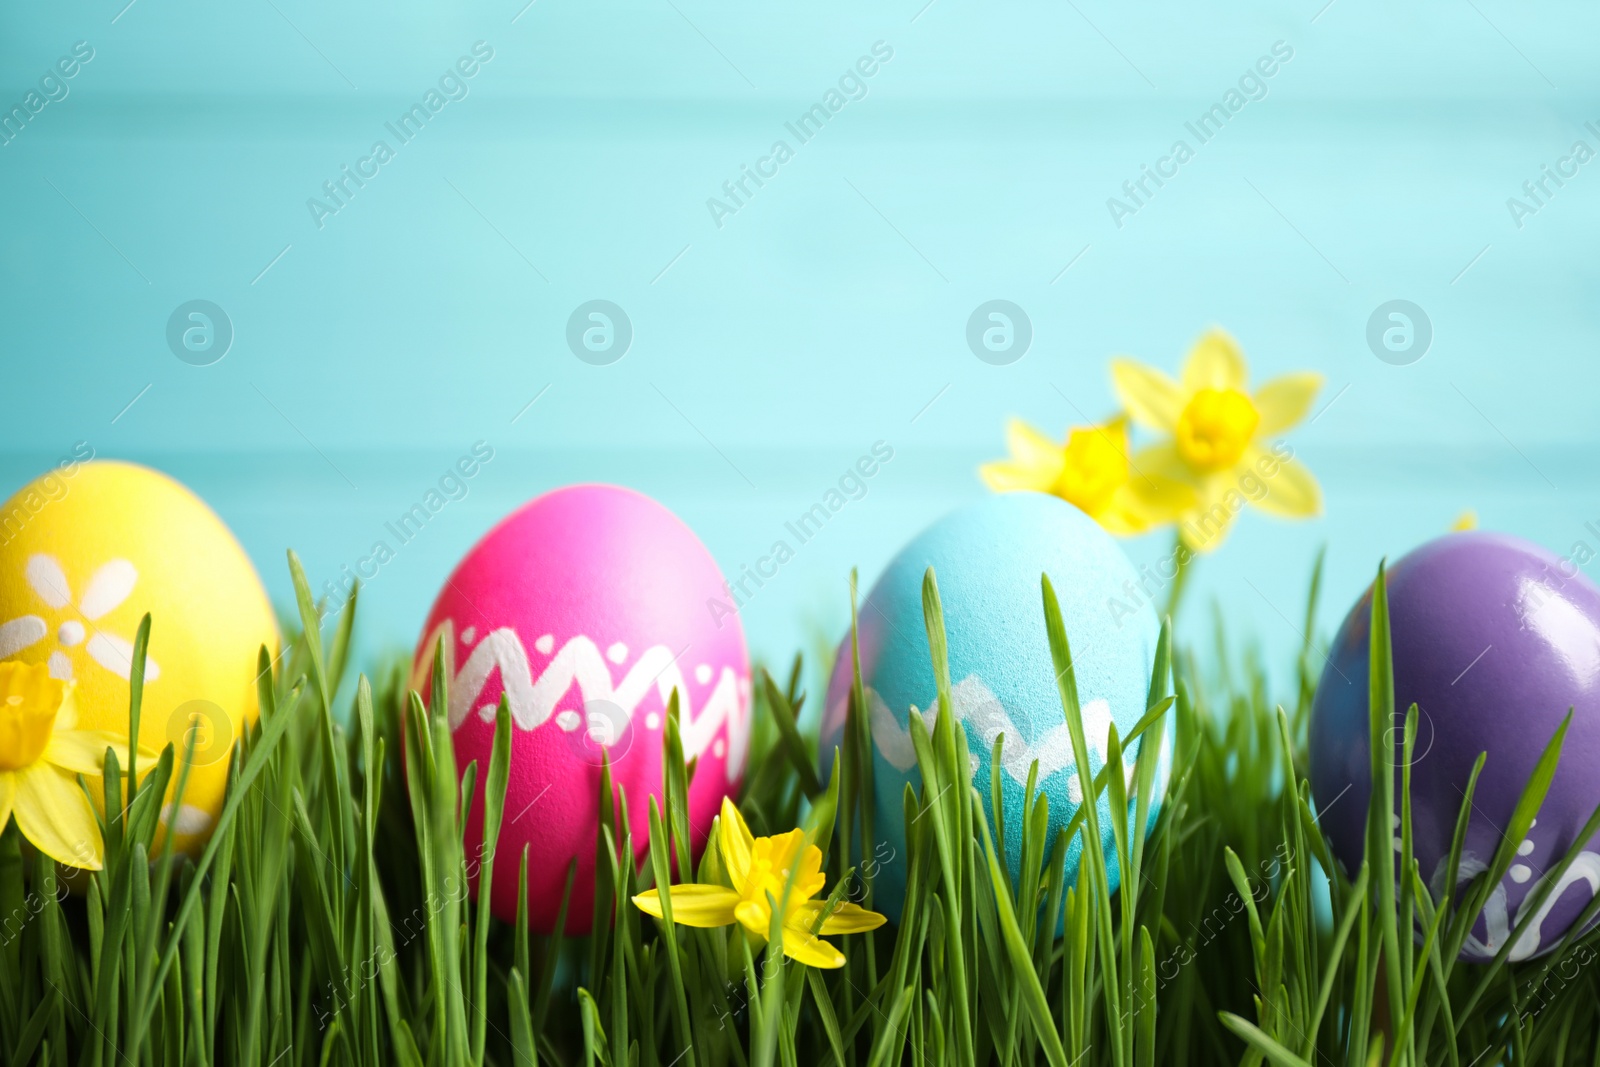 Photo of Colorful Easter eggs and narcissus flowers in green grass against light blue background